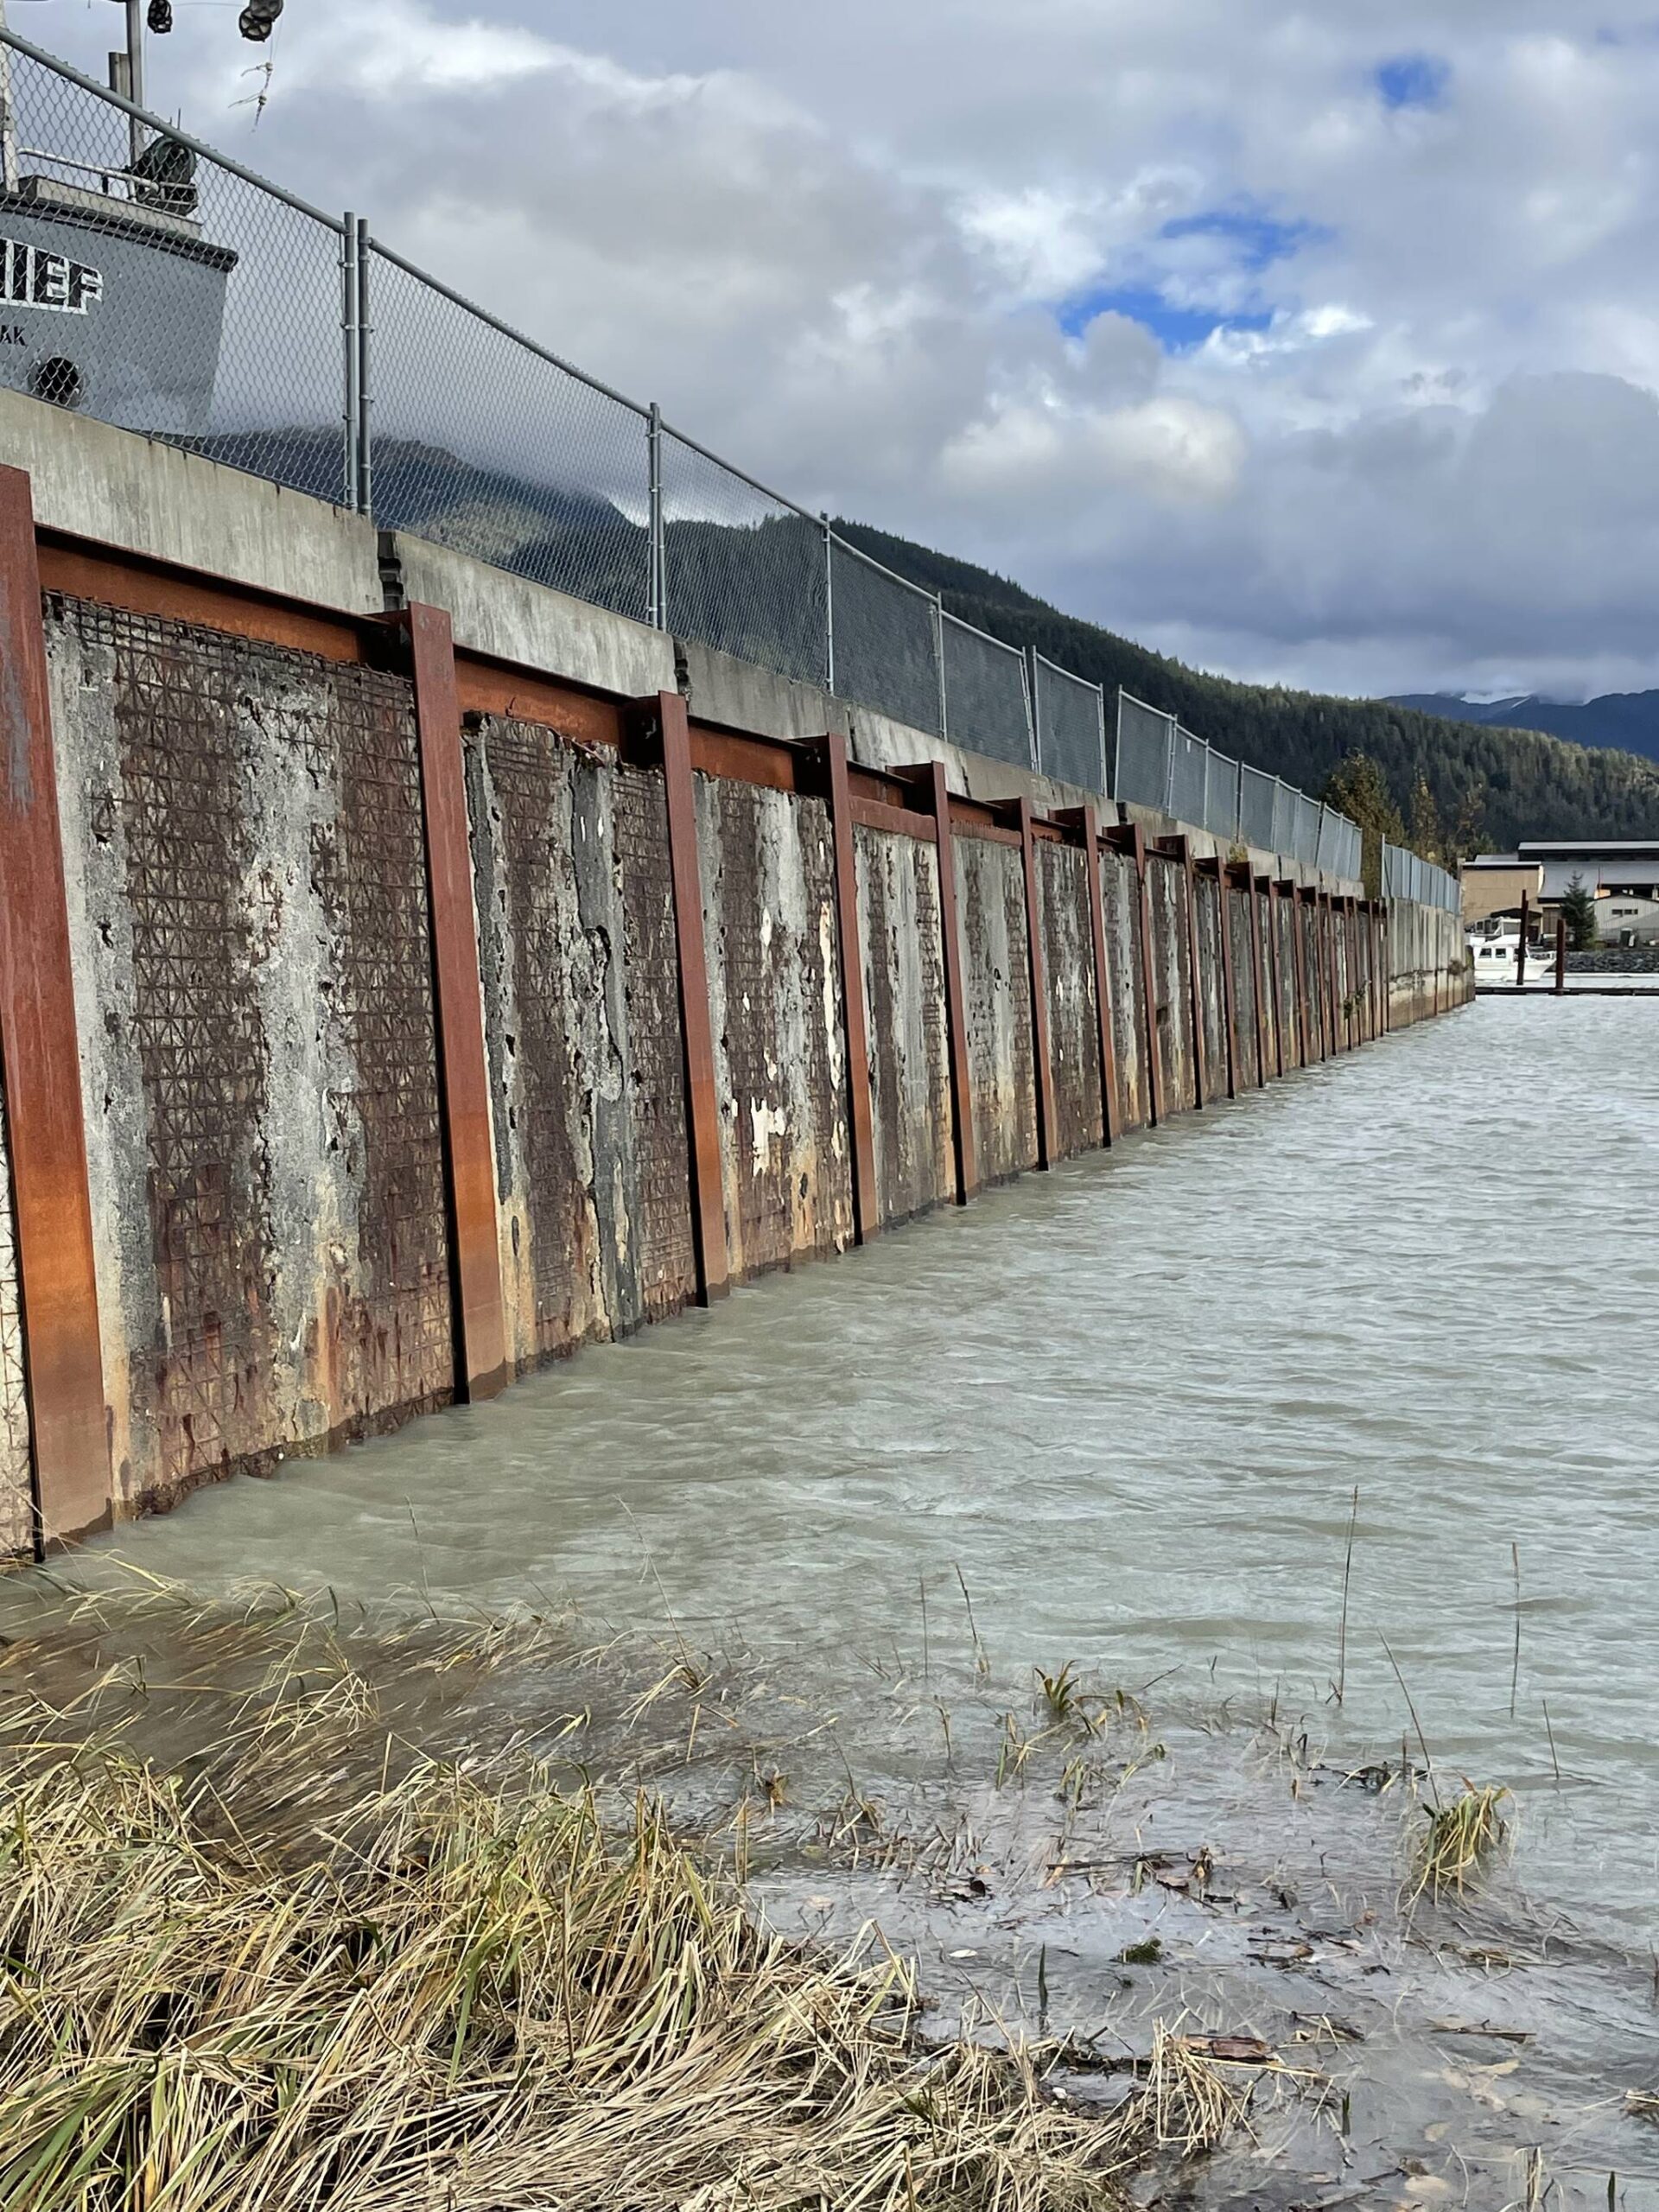 A Mendenhall River area retaining wall built with segments of the roadbed from the first Douglas Bridge. Texture of the traffic-worn decking can be seen on the upright panels. (Photo by Laurie Craig)